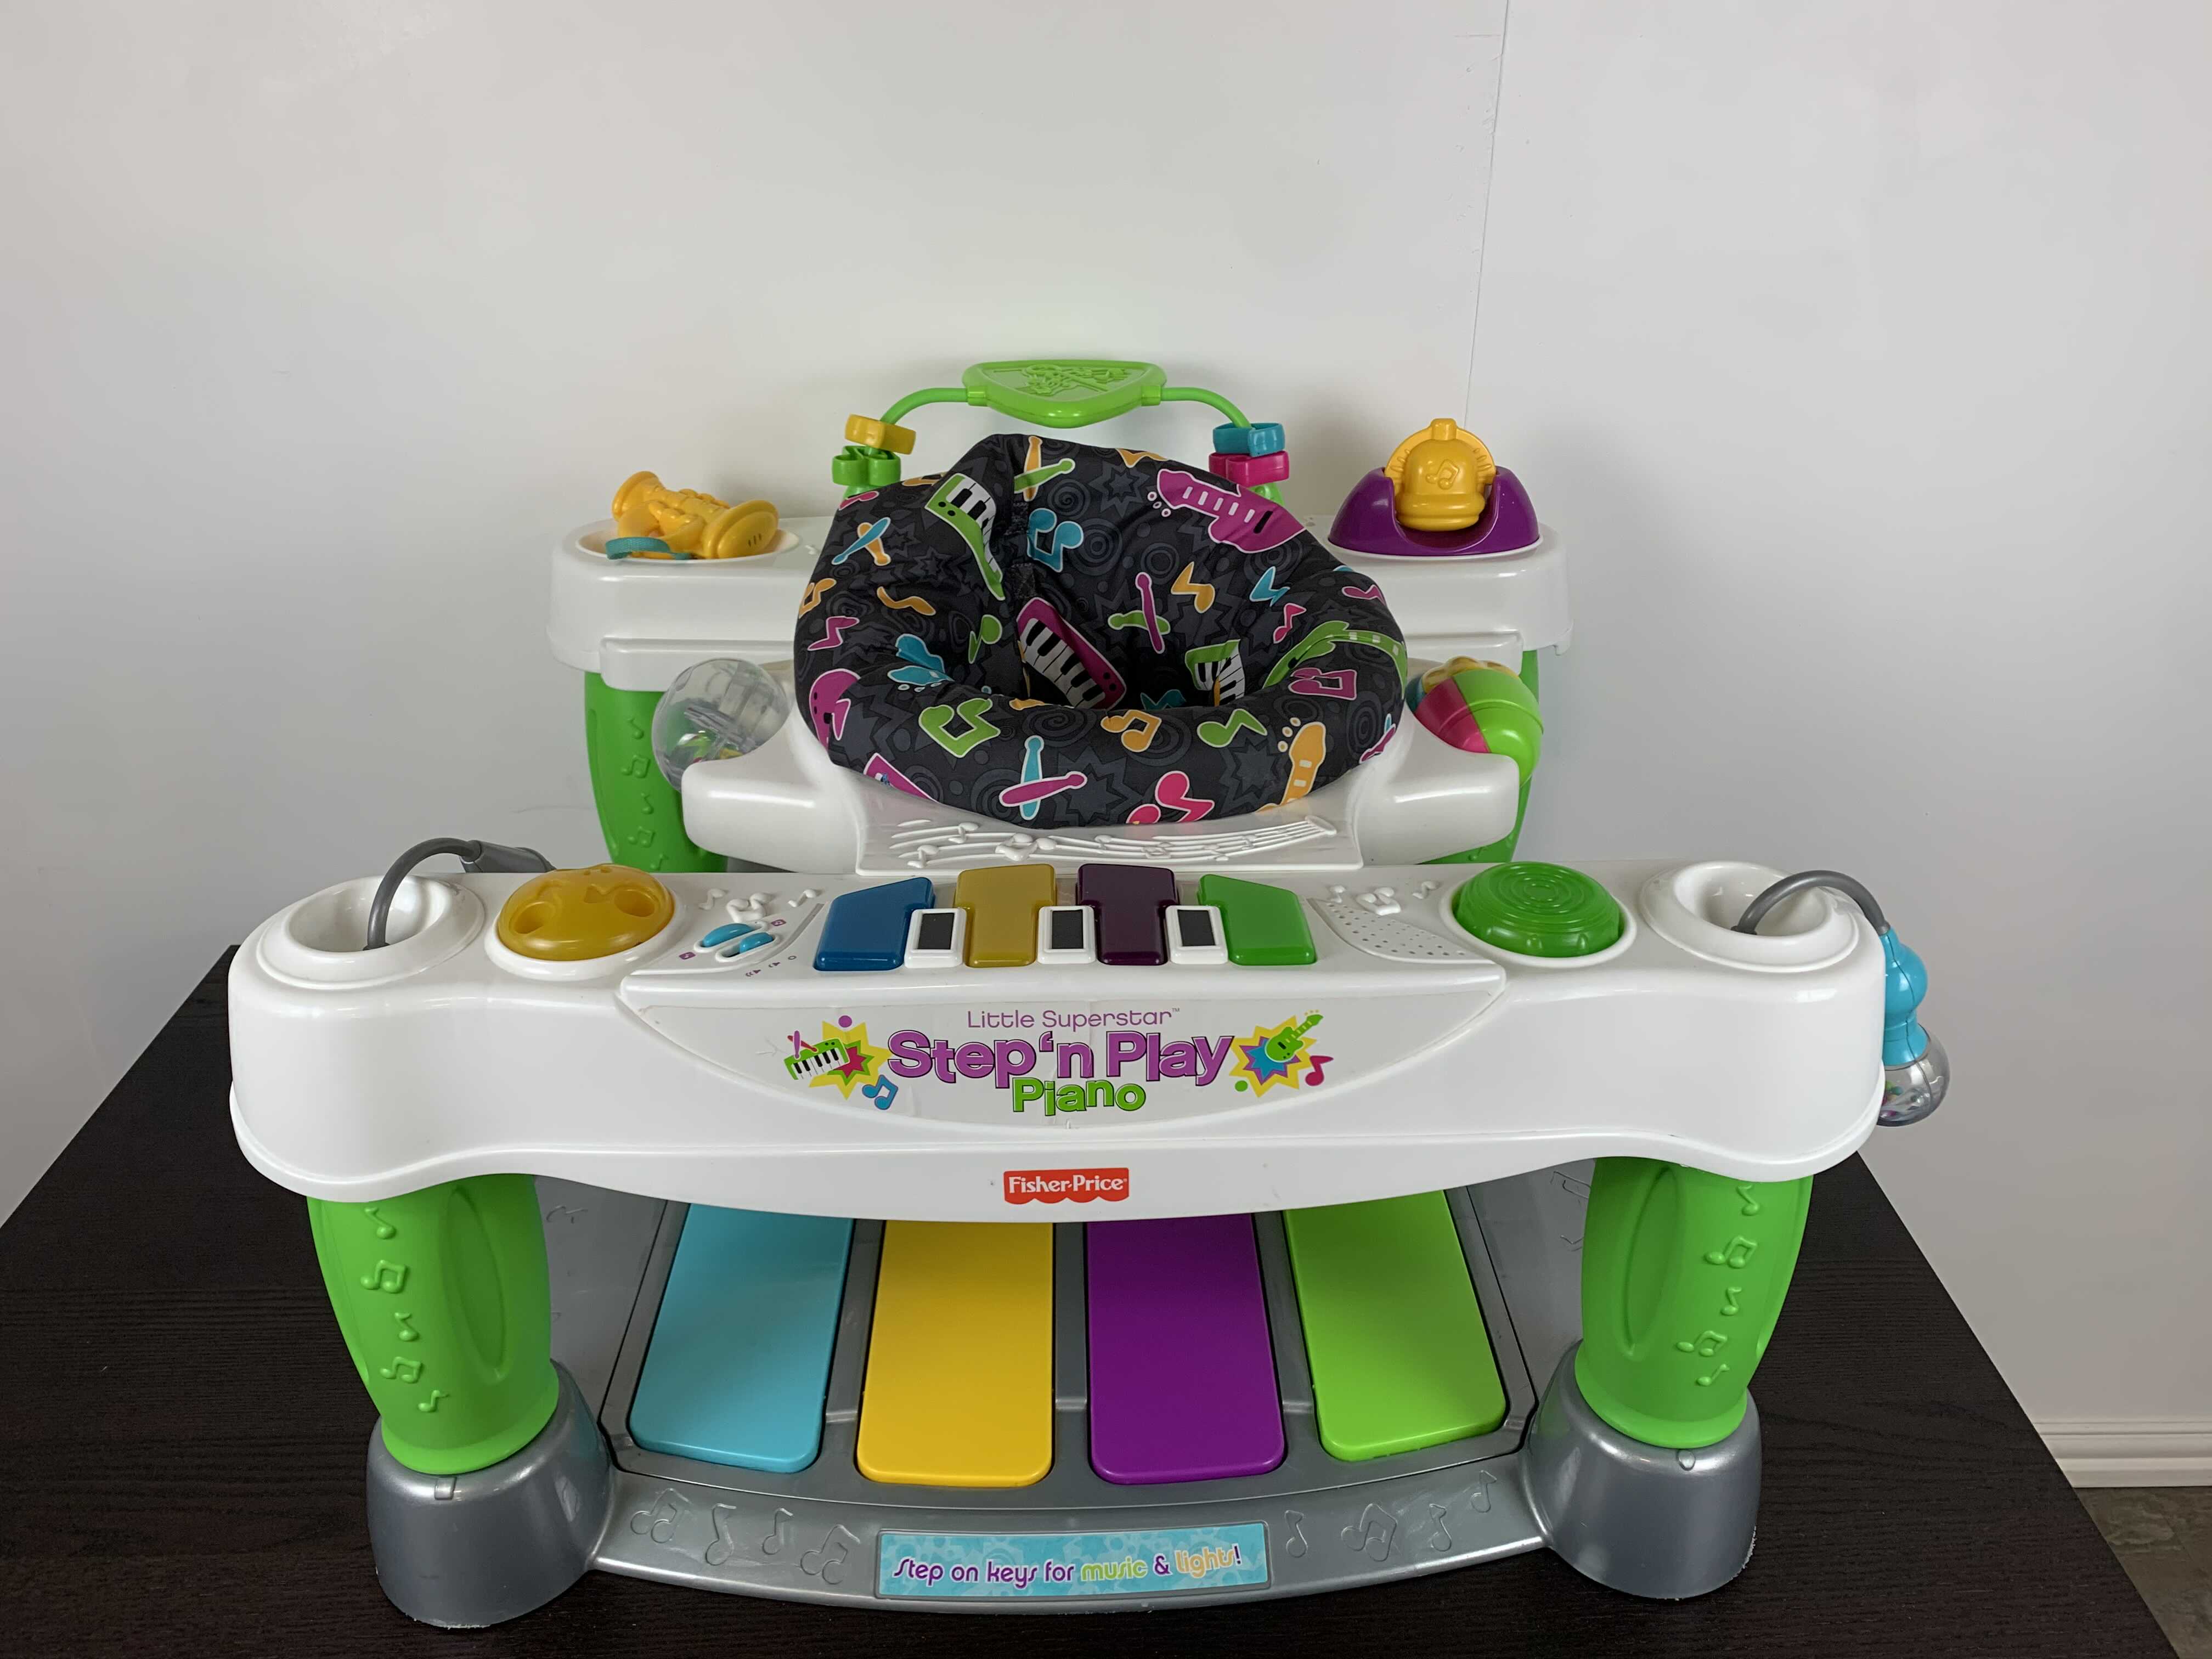 Fisher Price Little Superstar Step 'n Play Piano